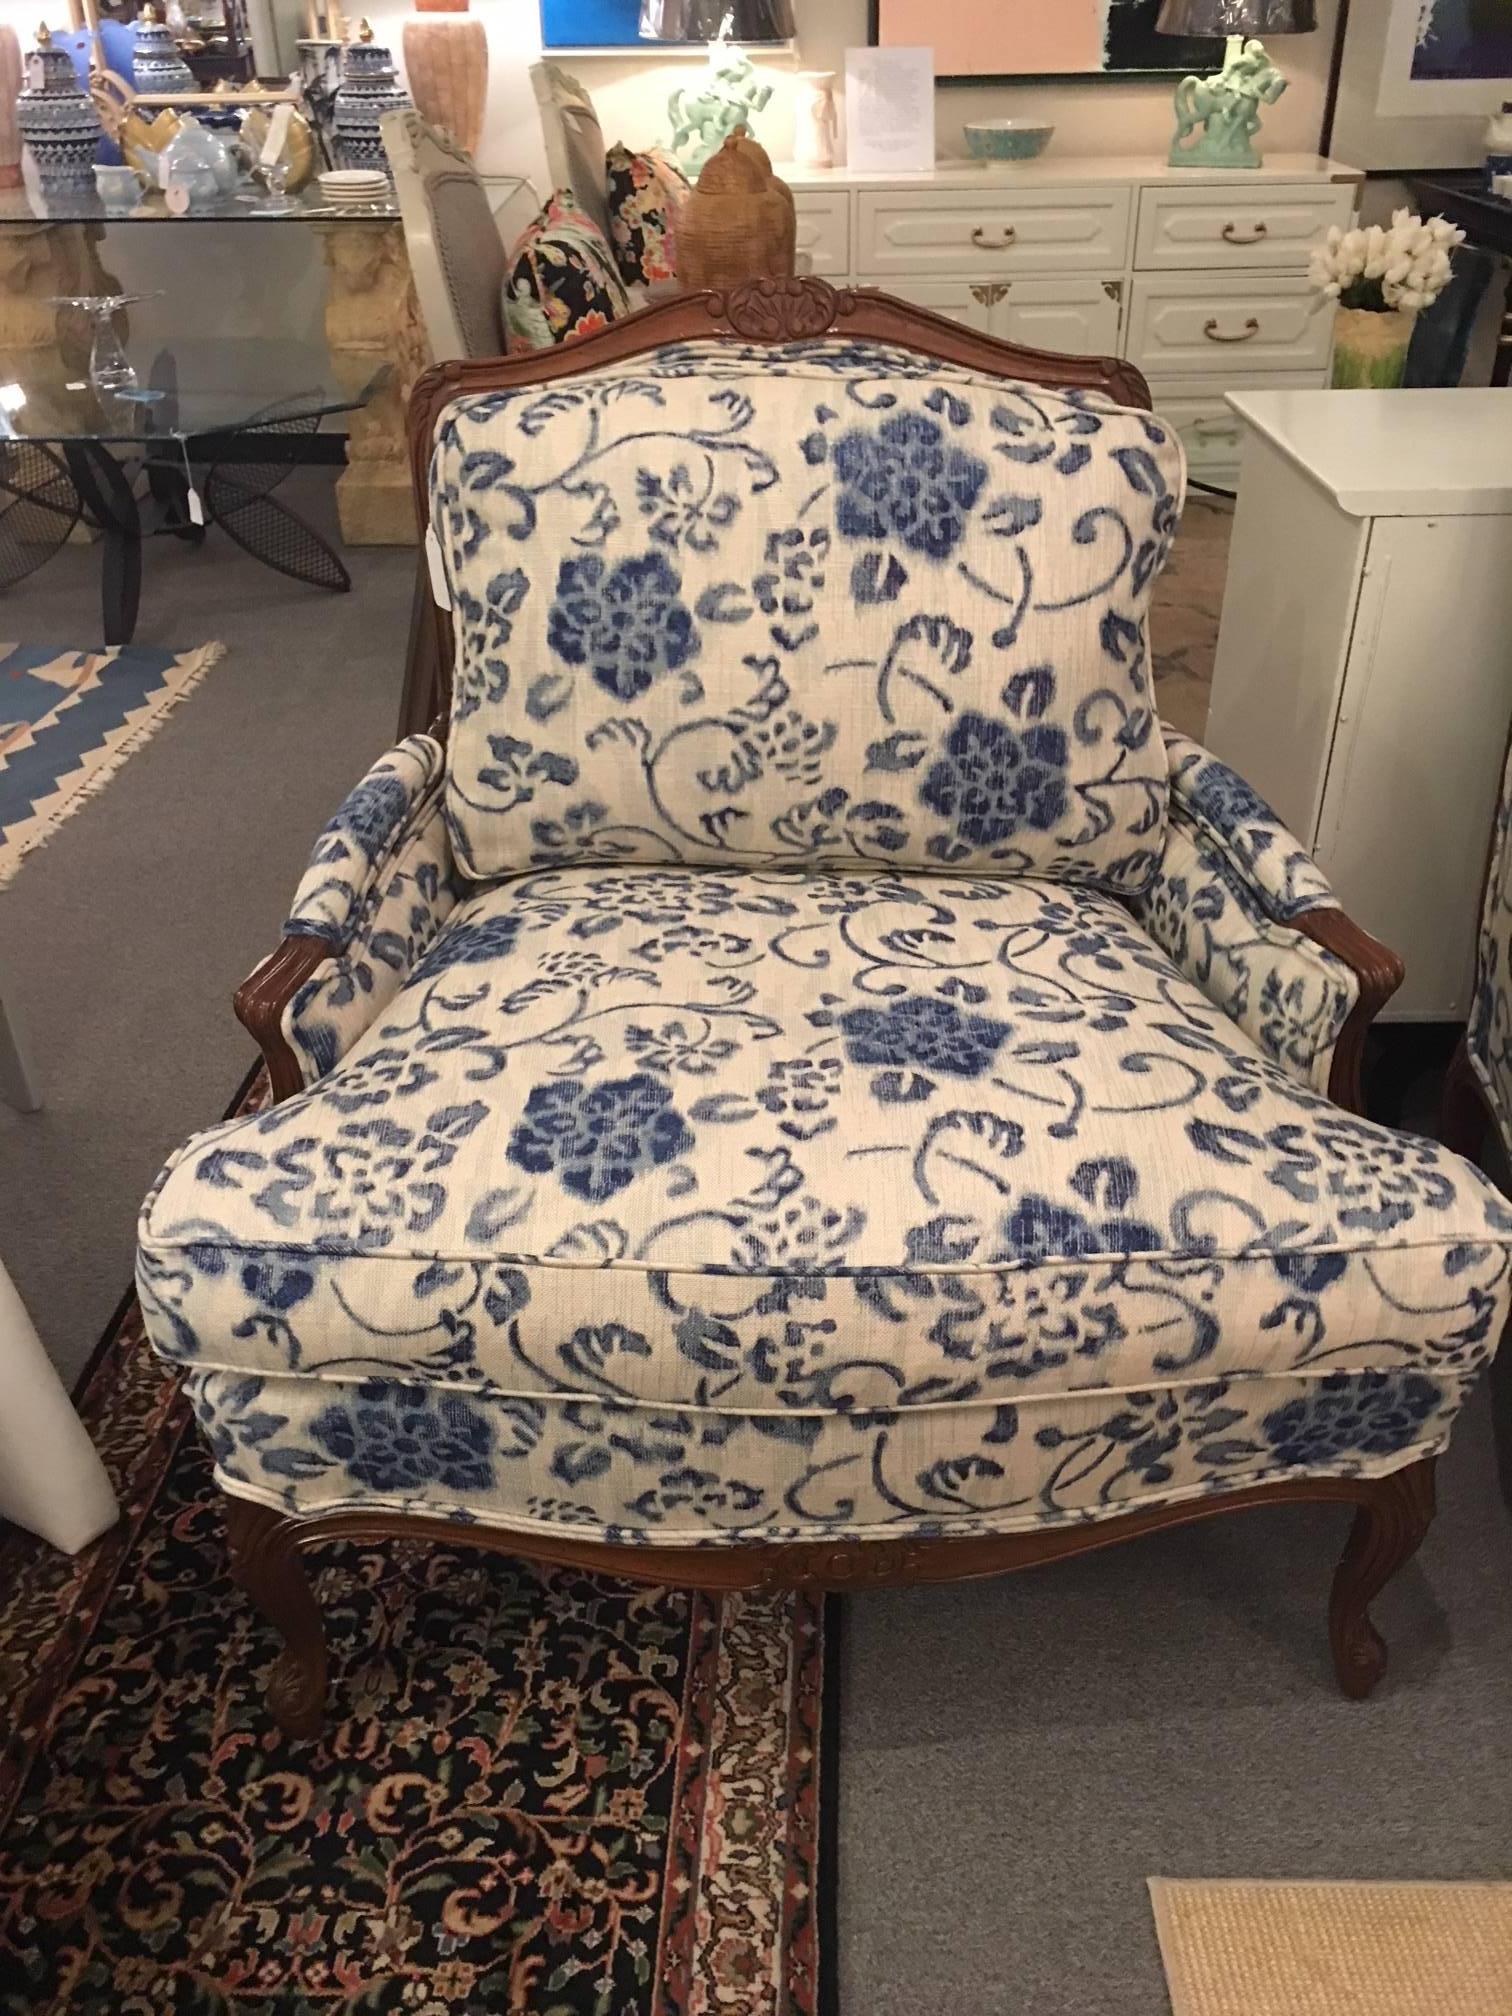 This pair of Taylor King bergere chairs is roomy, solid and comfortable and in excellent condition. Just reupholstered in a beautiful indigo and ivory woven fabric.